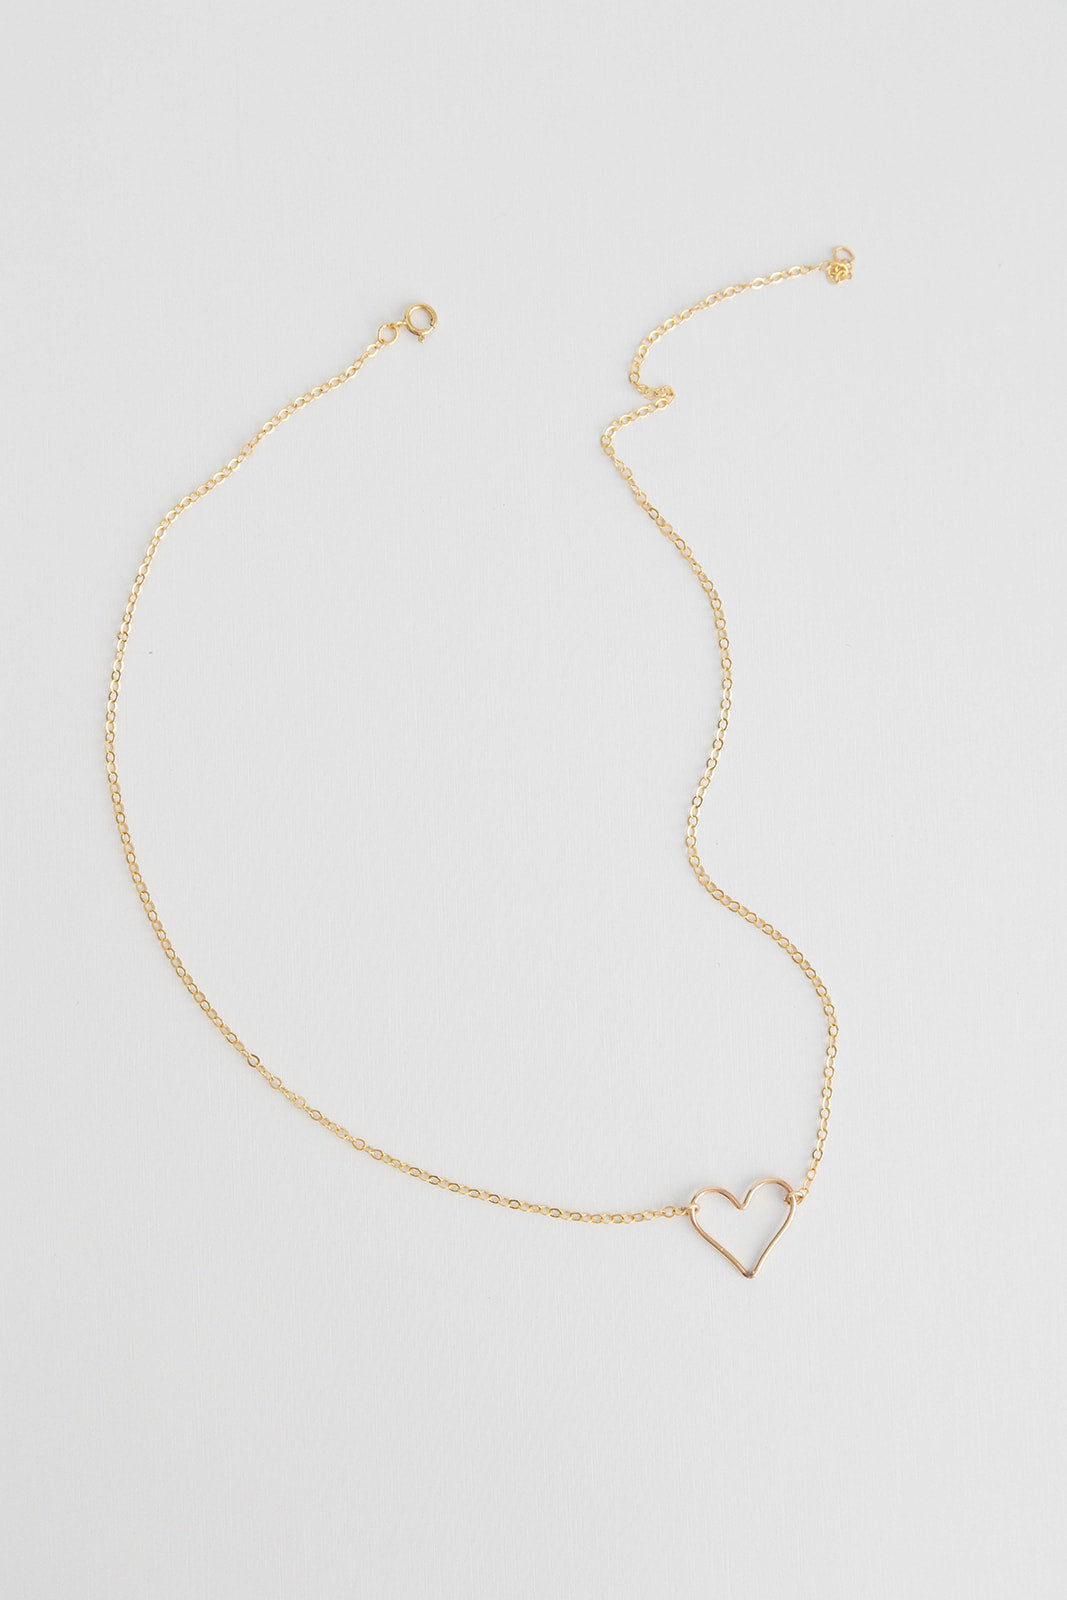 A dainty 14k gold filled floating heart necklace laying on a white background.